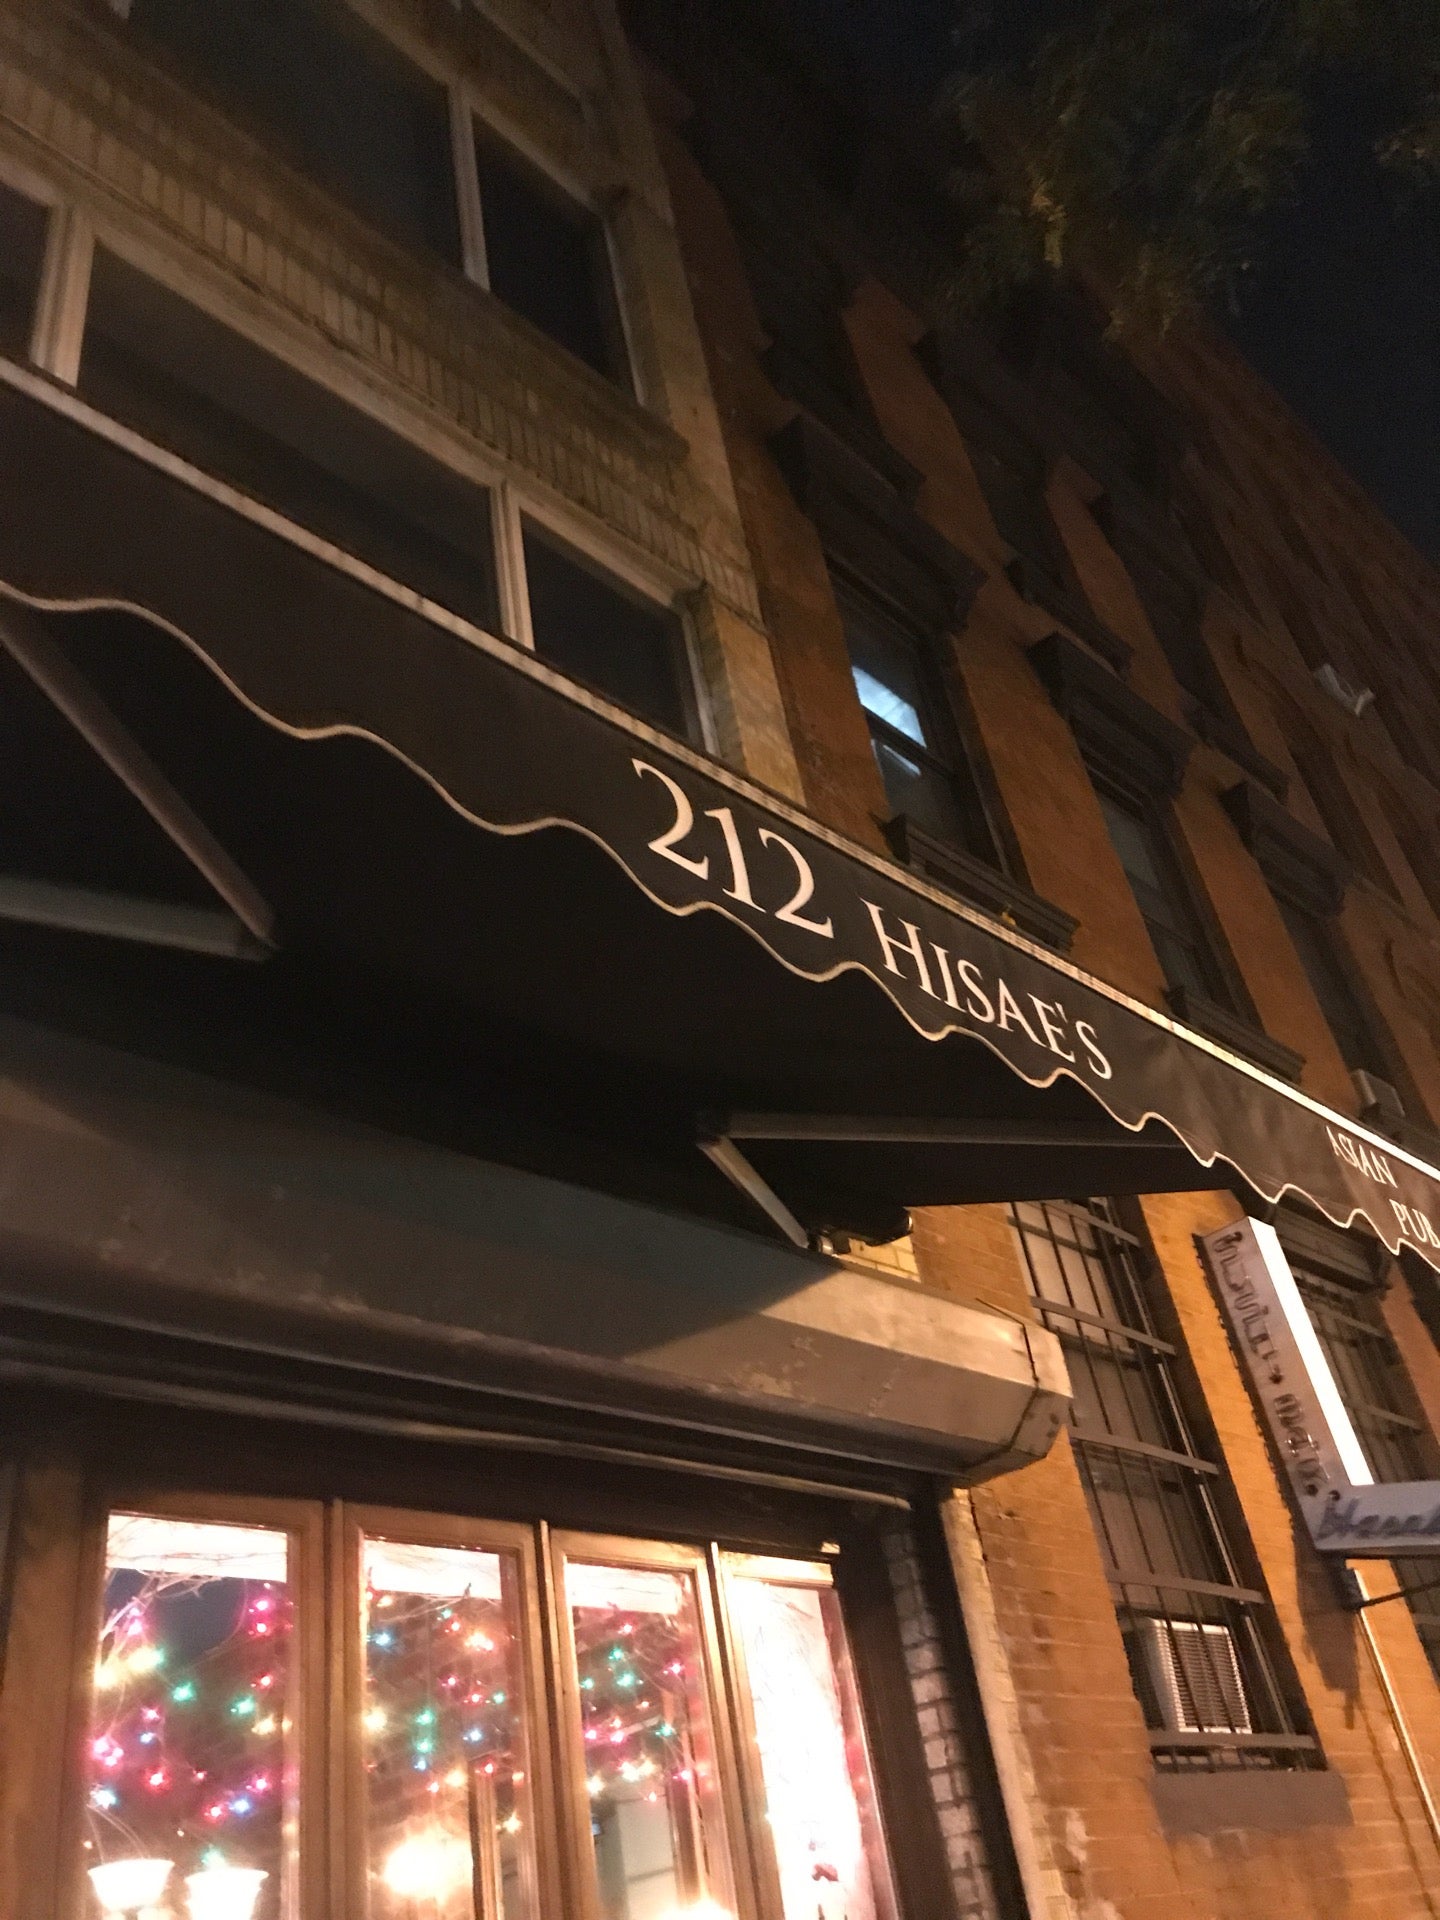 212 Hisae's, 212 E 9th St, New York, NY, Eating places - MapQuest